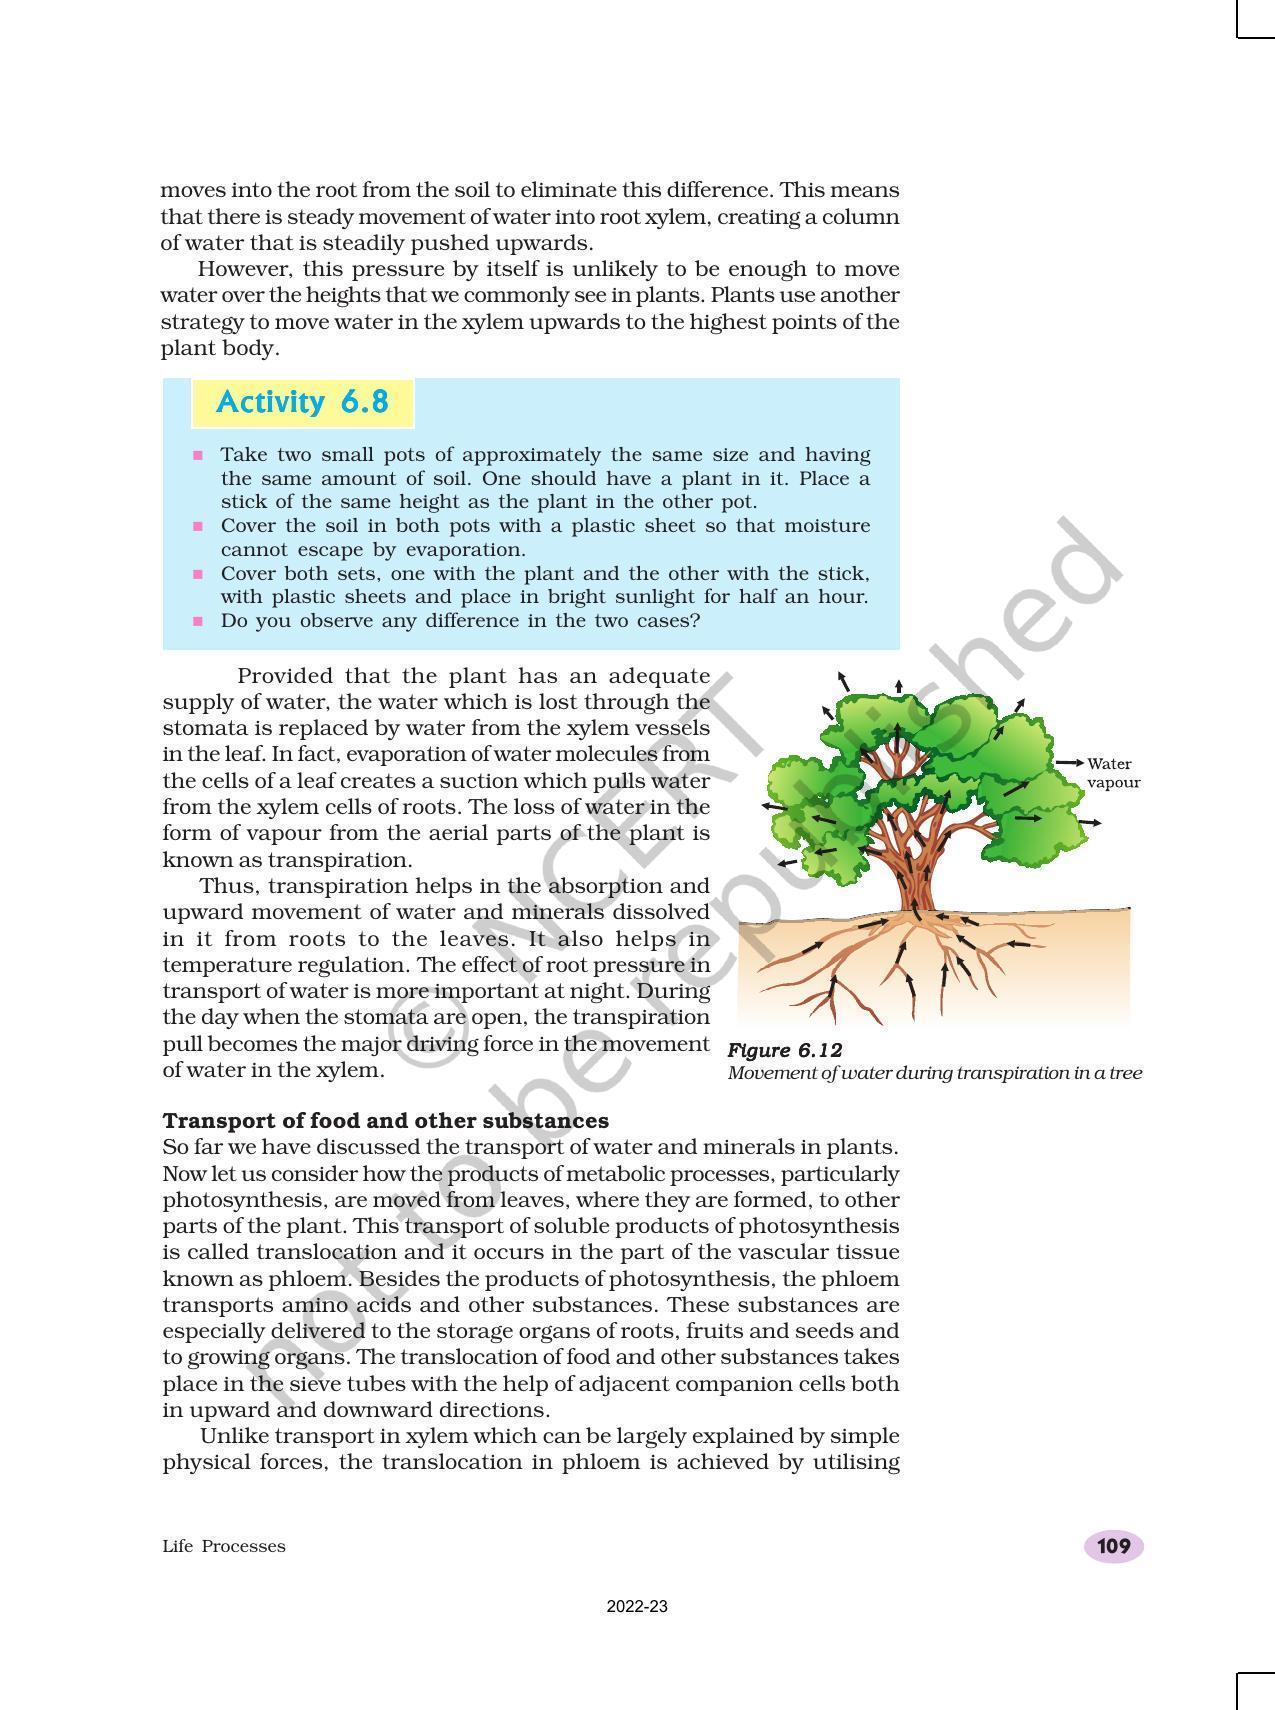 NCERT Book for Class 10 Science Chapter 6 Life Processes - Page 17